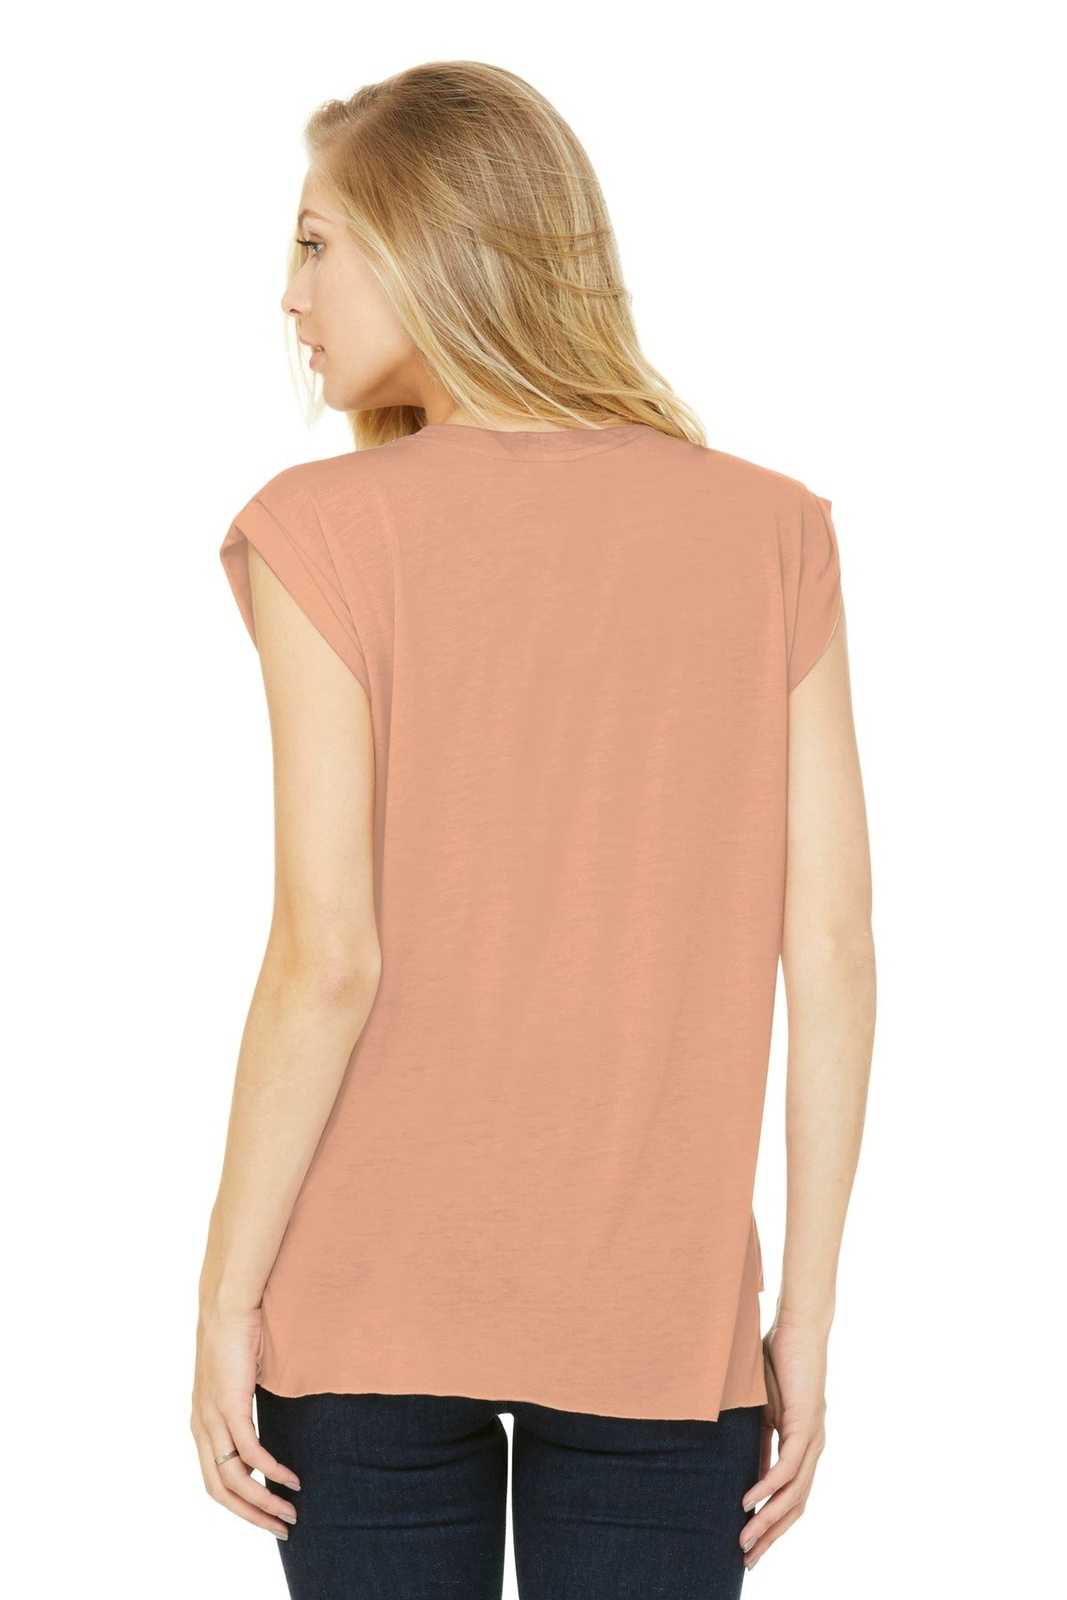 Bella + Canvas 8804 Women's Flowy Muscle Tee with Rolled Cuffs - Peach - HIT a Double